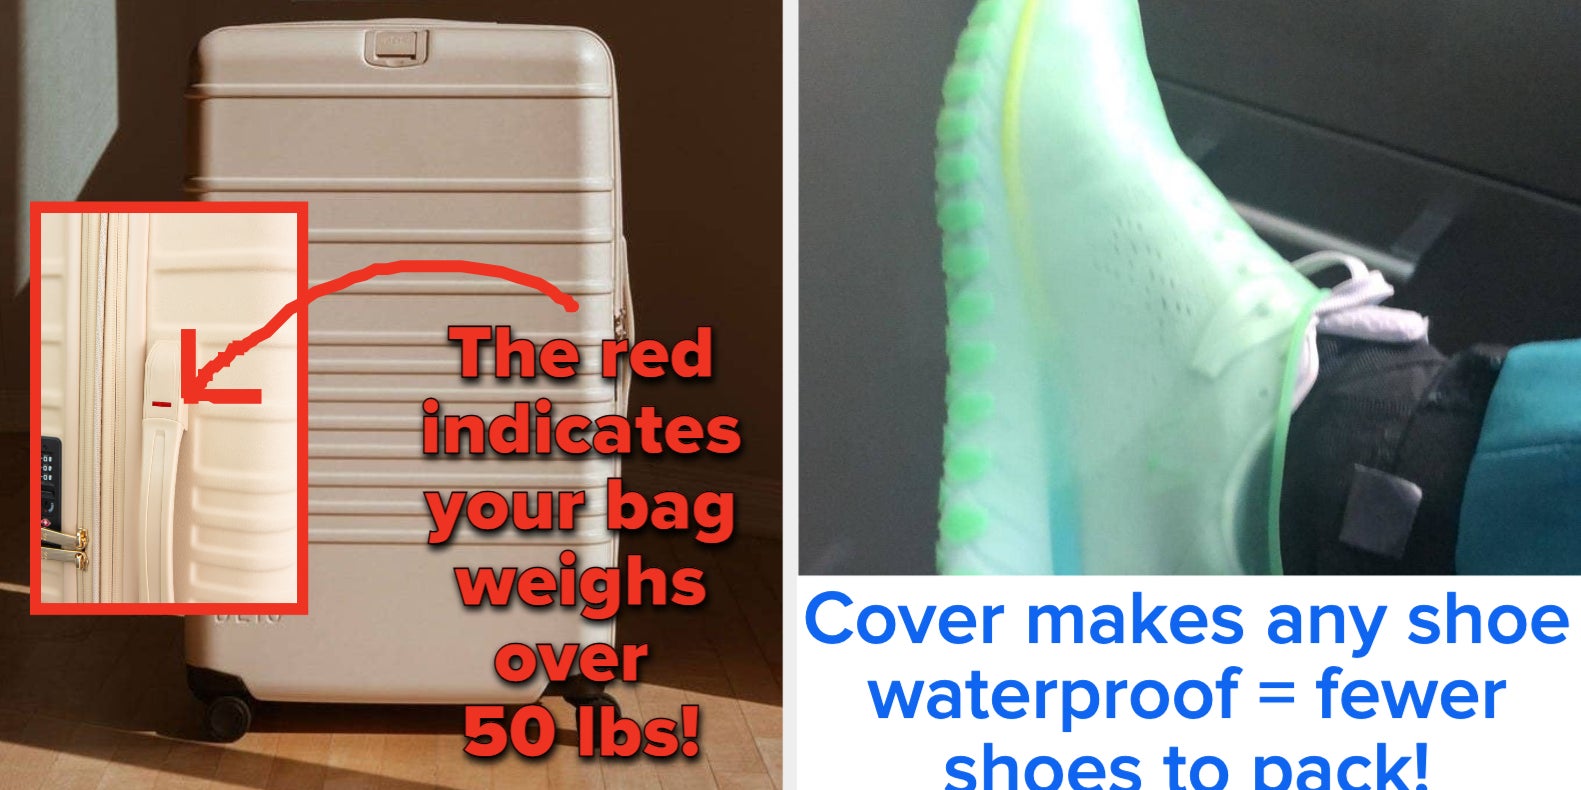 Self-weighing suitcase knows exactly how heavy it is